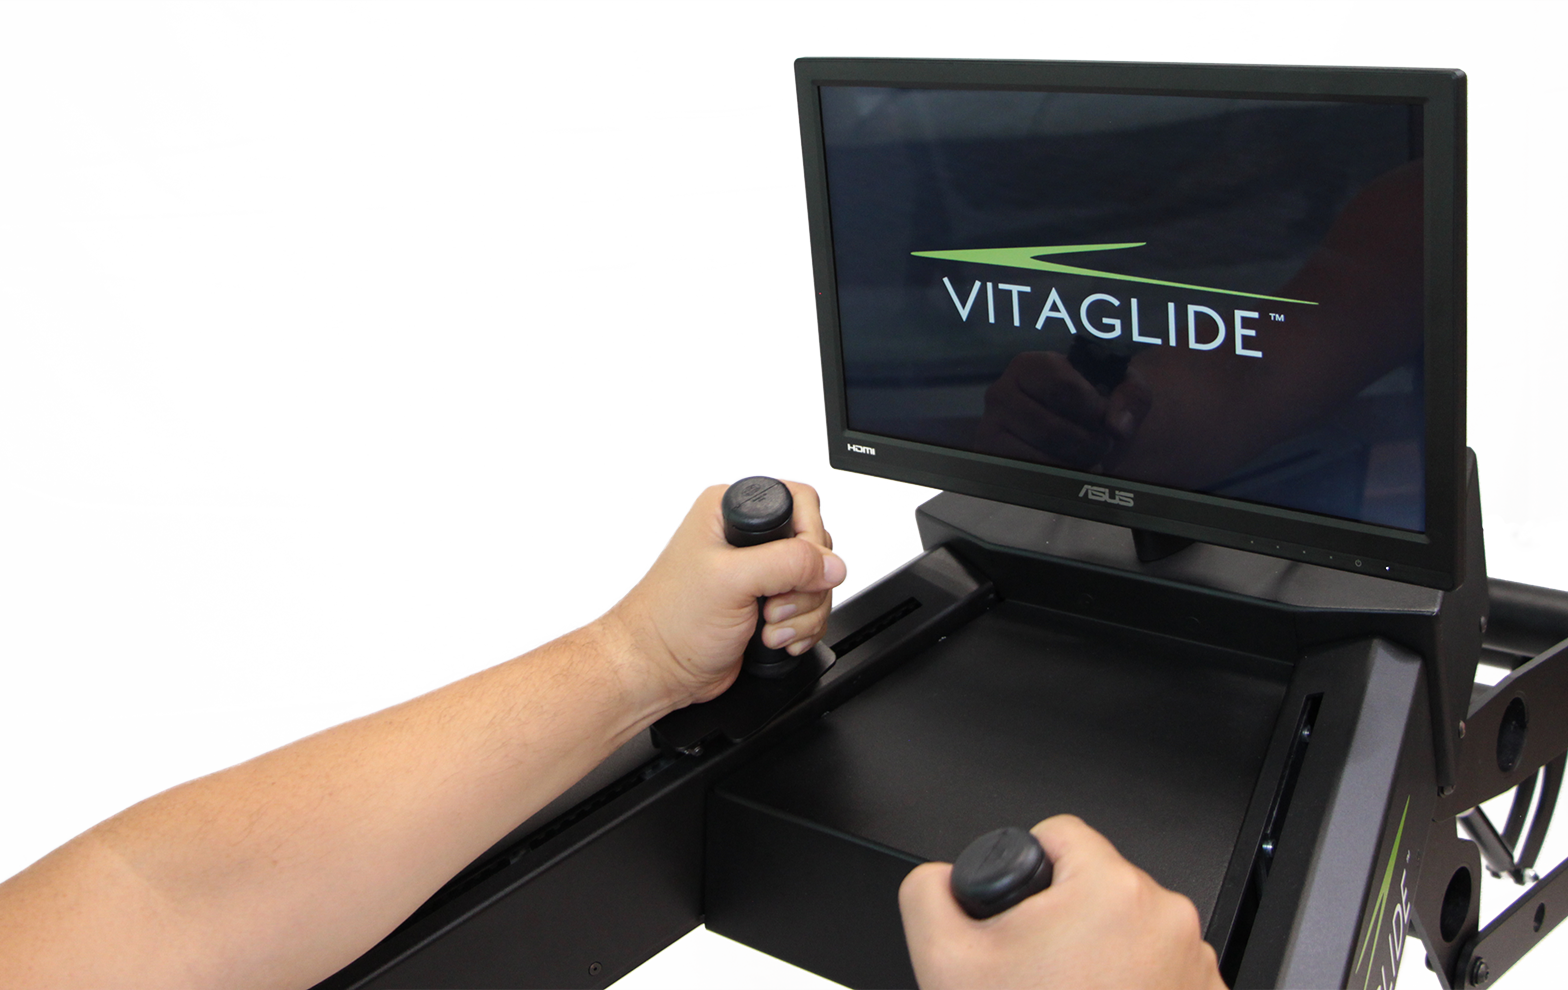 Image of VitaGlide user looking at monitor on the machine